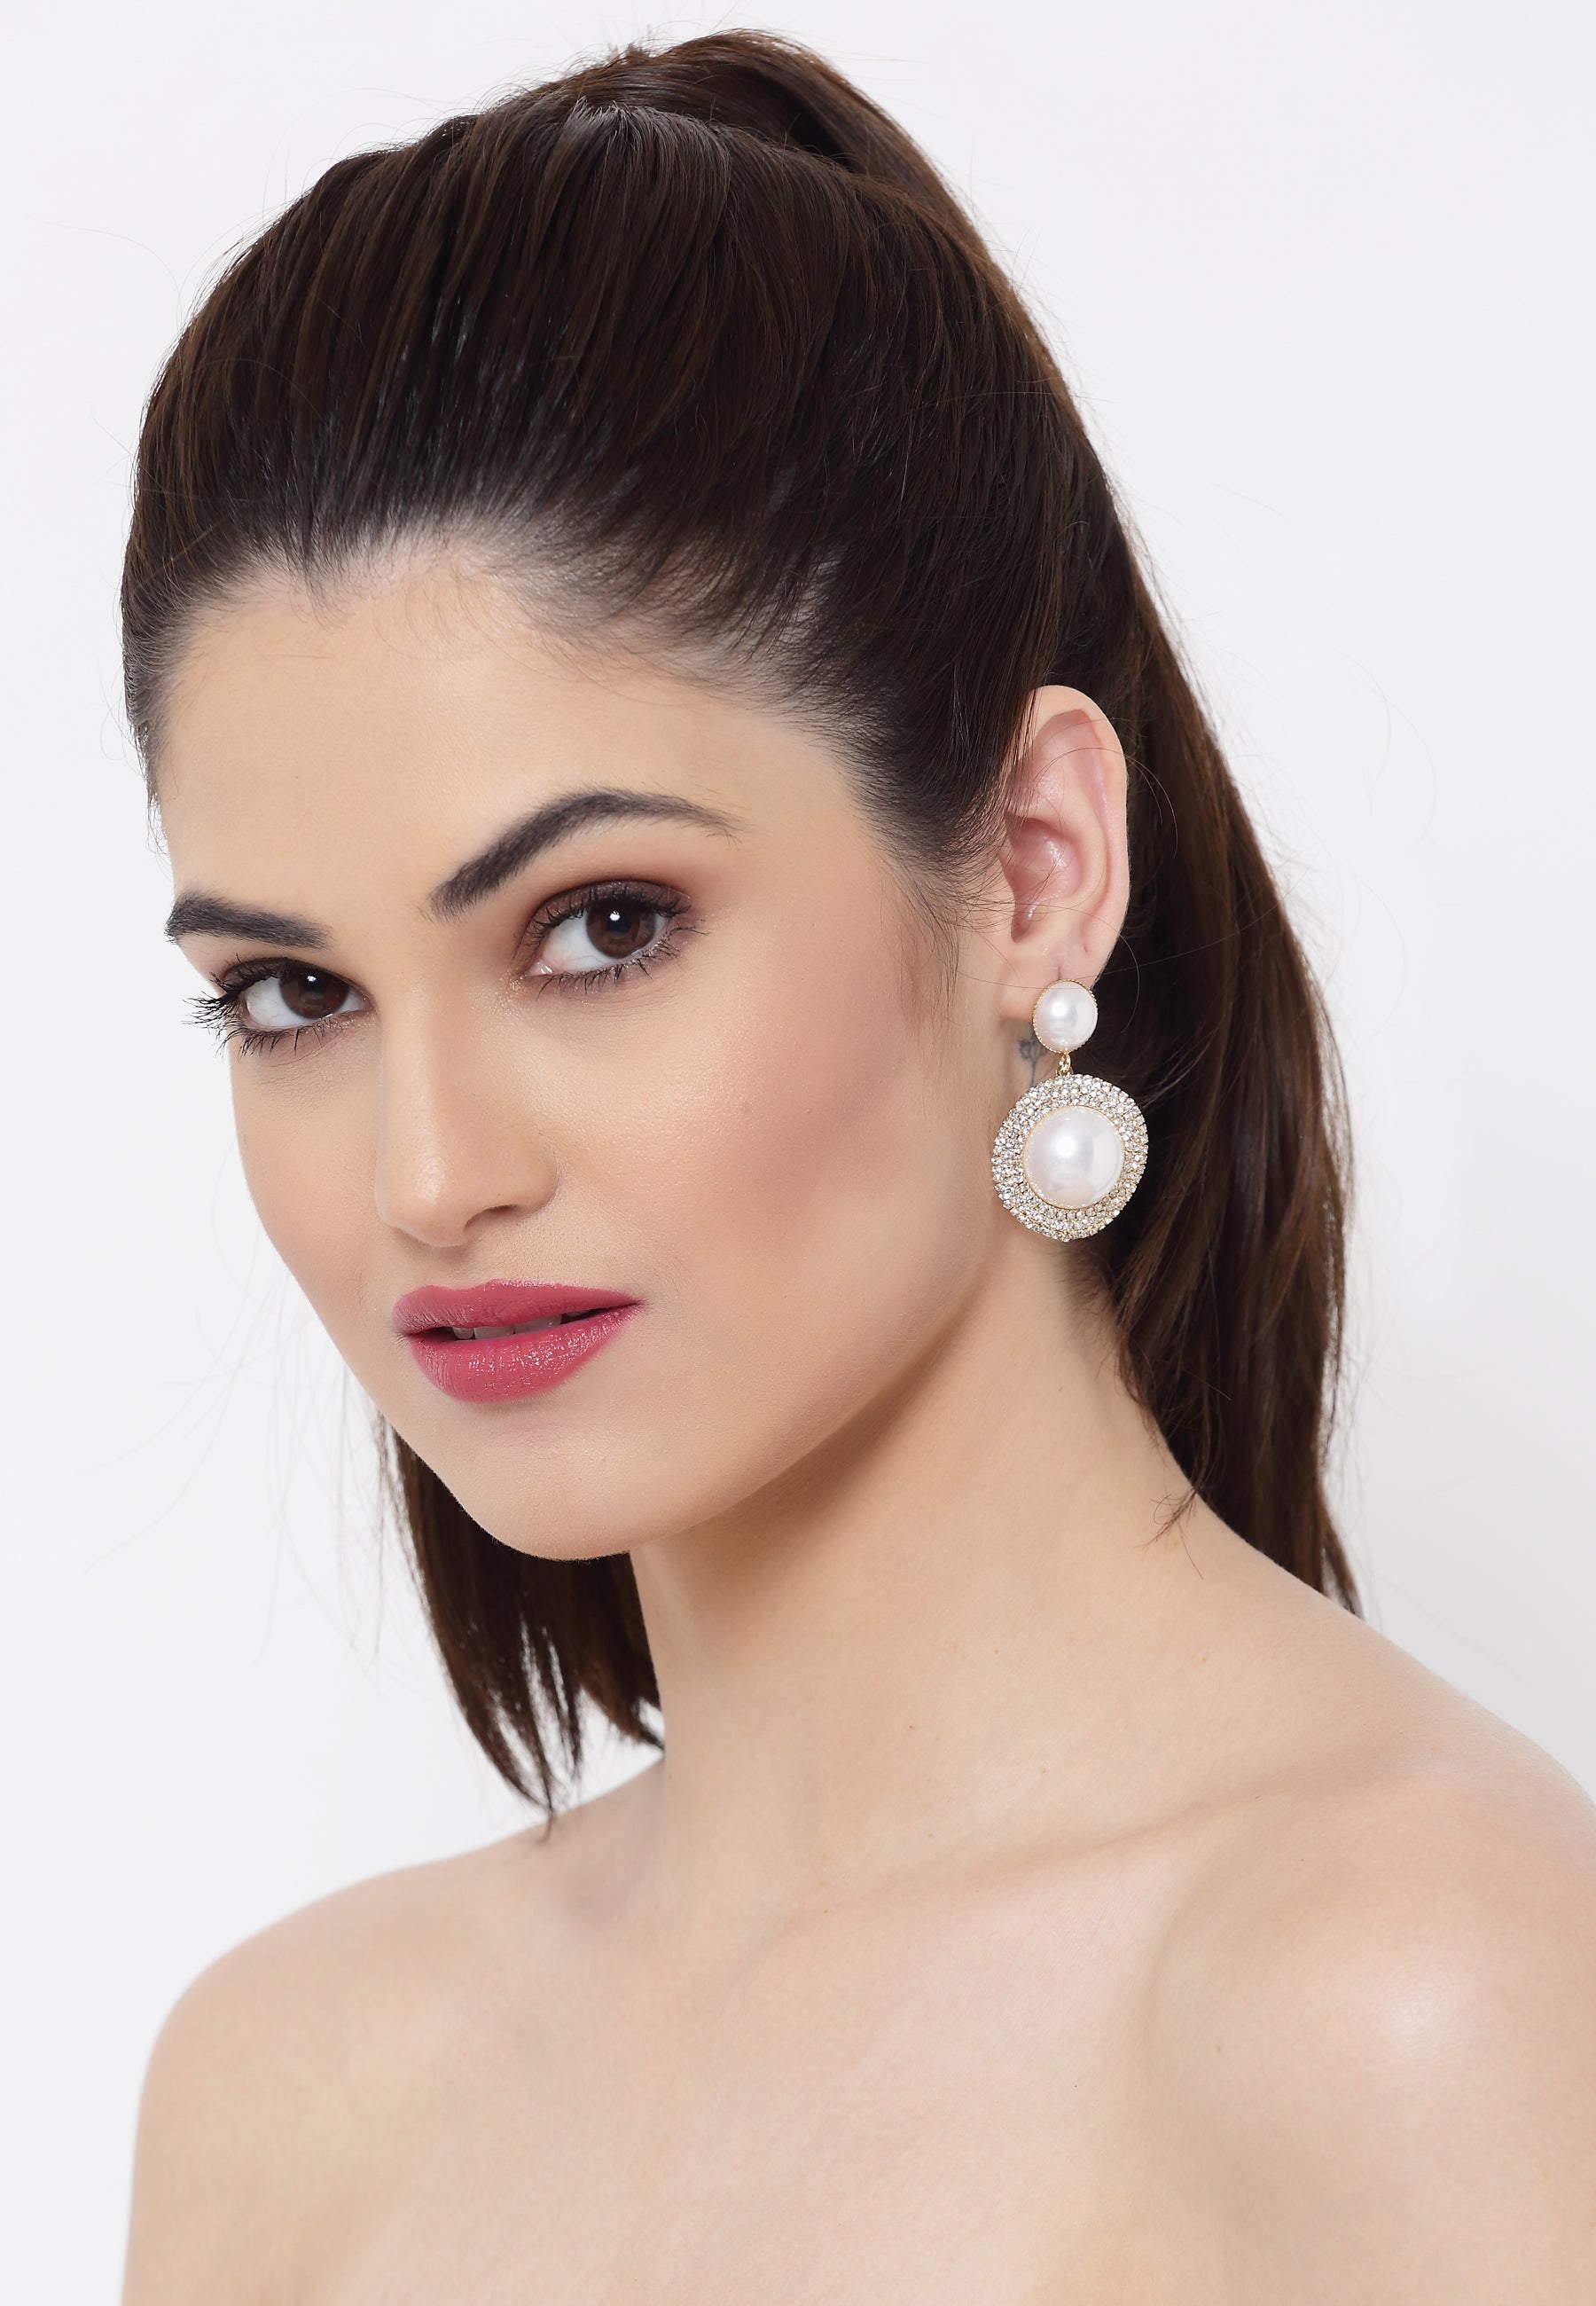 Intricate Gold-Plated Dangling Earring